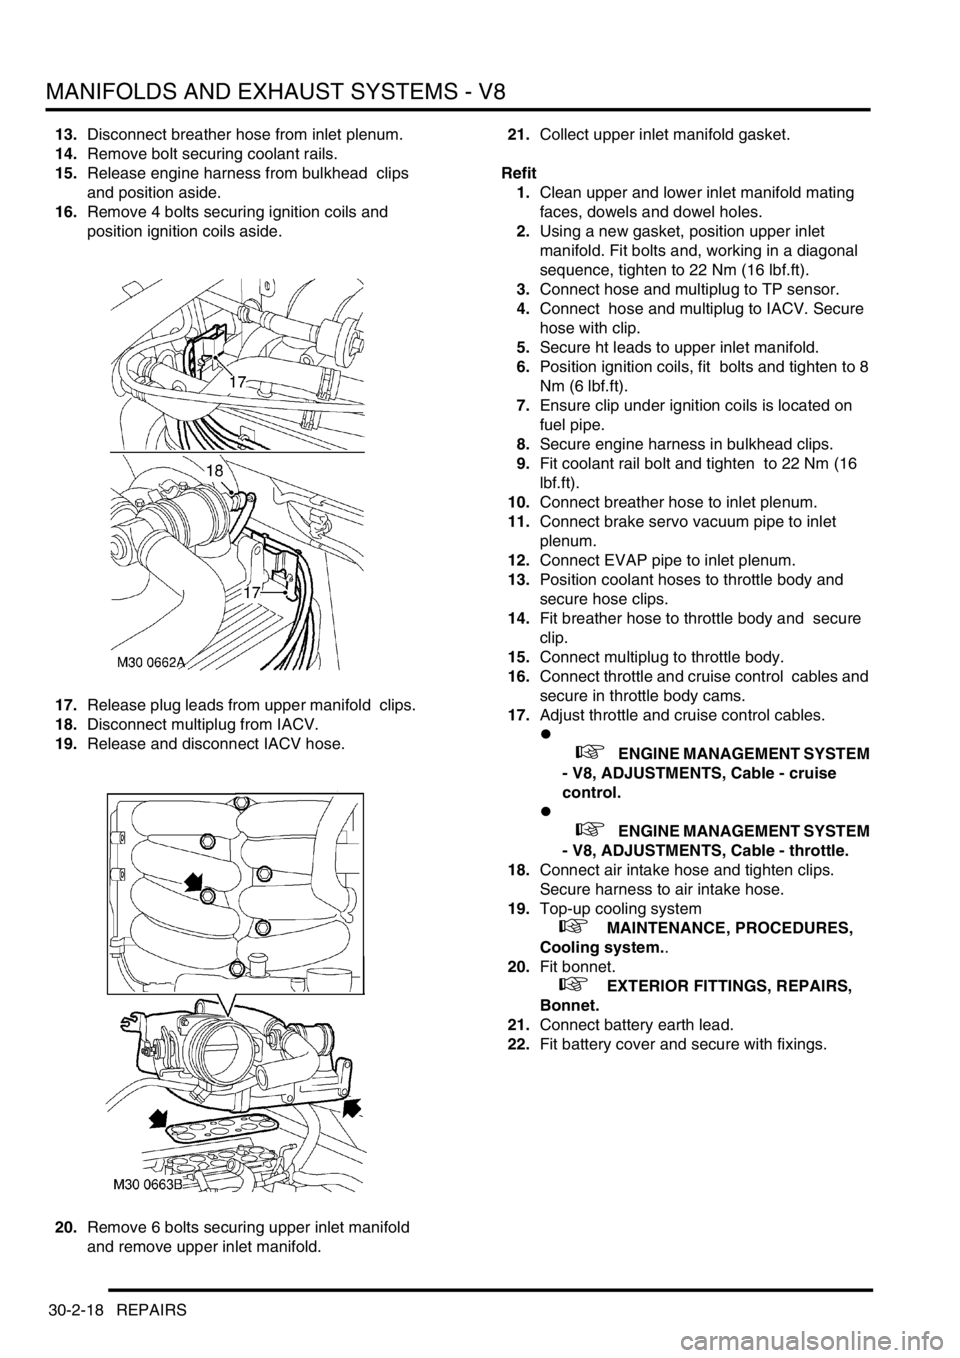 LAND ROVER DISCOVERY 2002 User Guide MANIFOLDS AND EXHAUST SYSTEMS - V8
30-2-18 REPAIRS
13.Disconnect breather hose from inlet plenum. 
14.Remove bolt securing coolant rails. 
15.Release engine harness from bulkhead  clips 
and position 